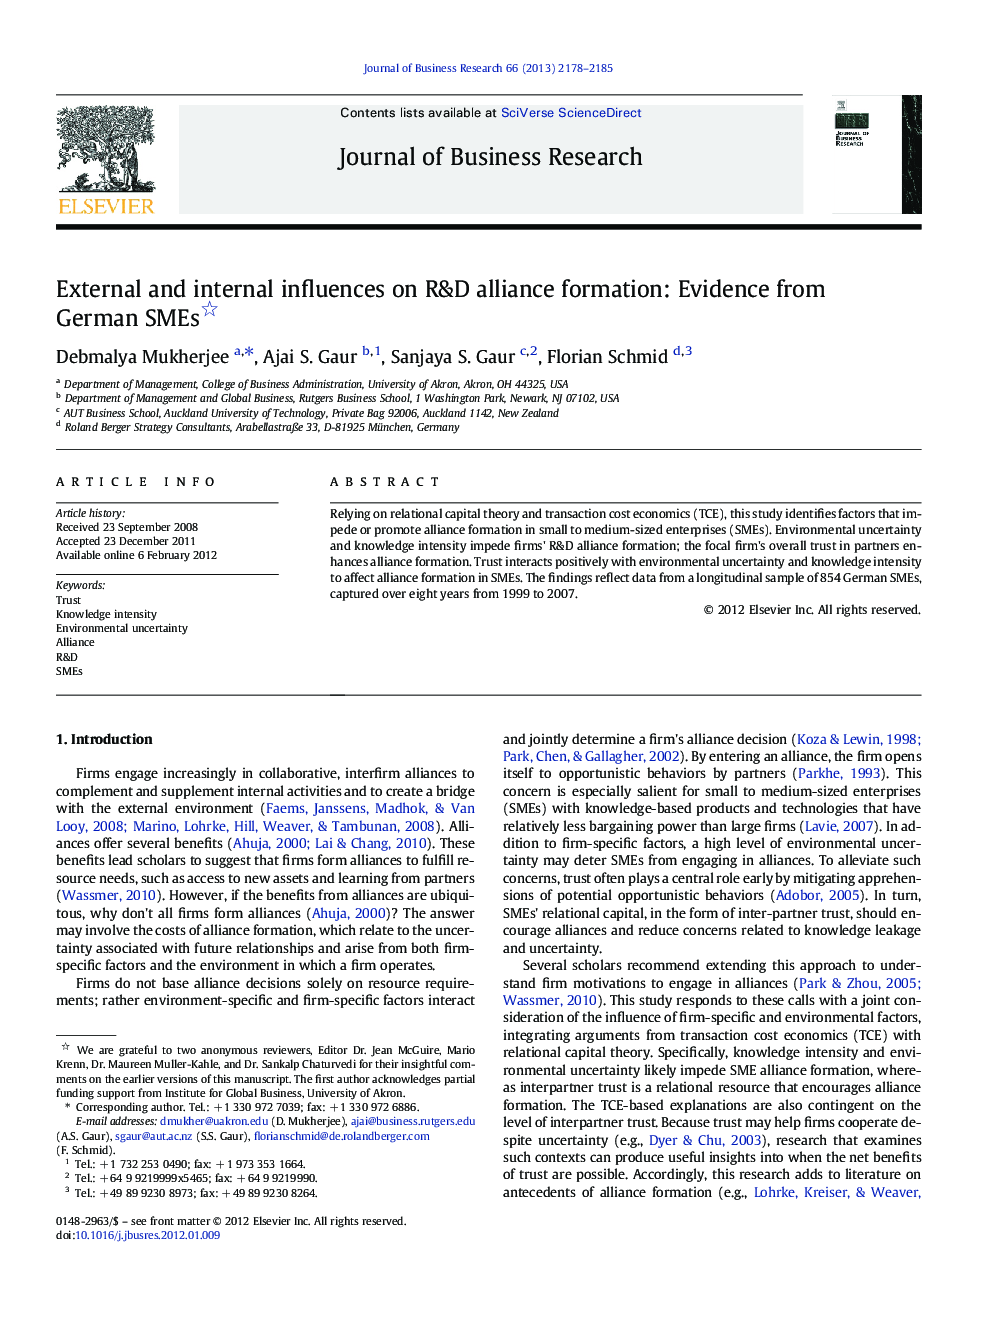 External and internal influences on R&D alliance formation: Evidence from German SMEs